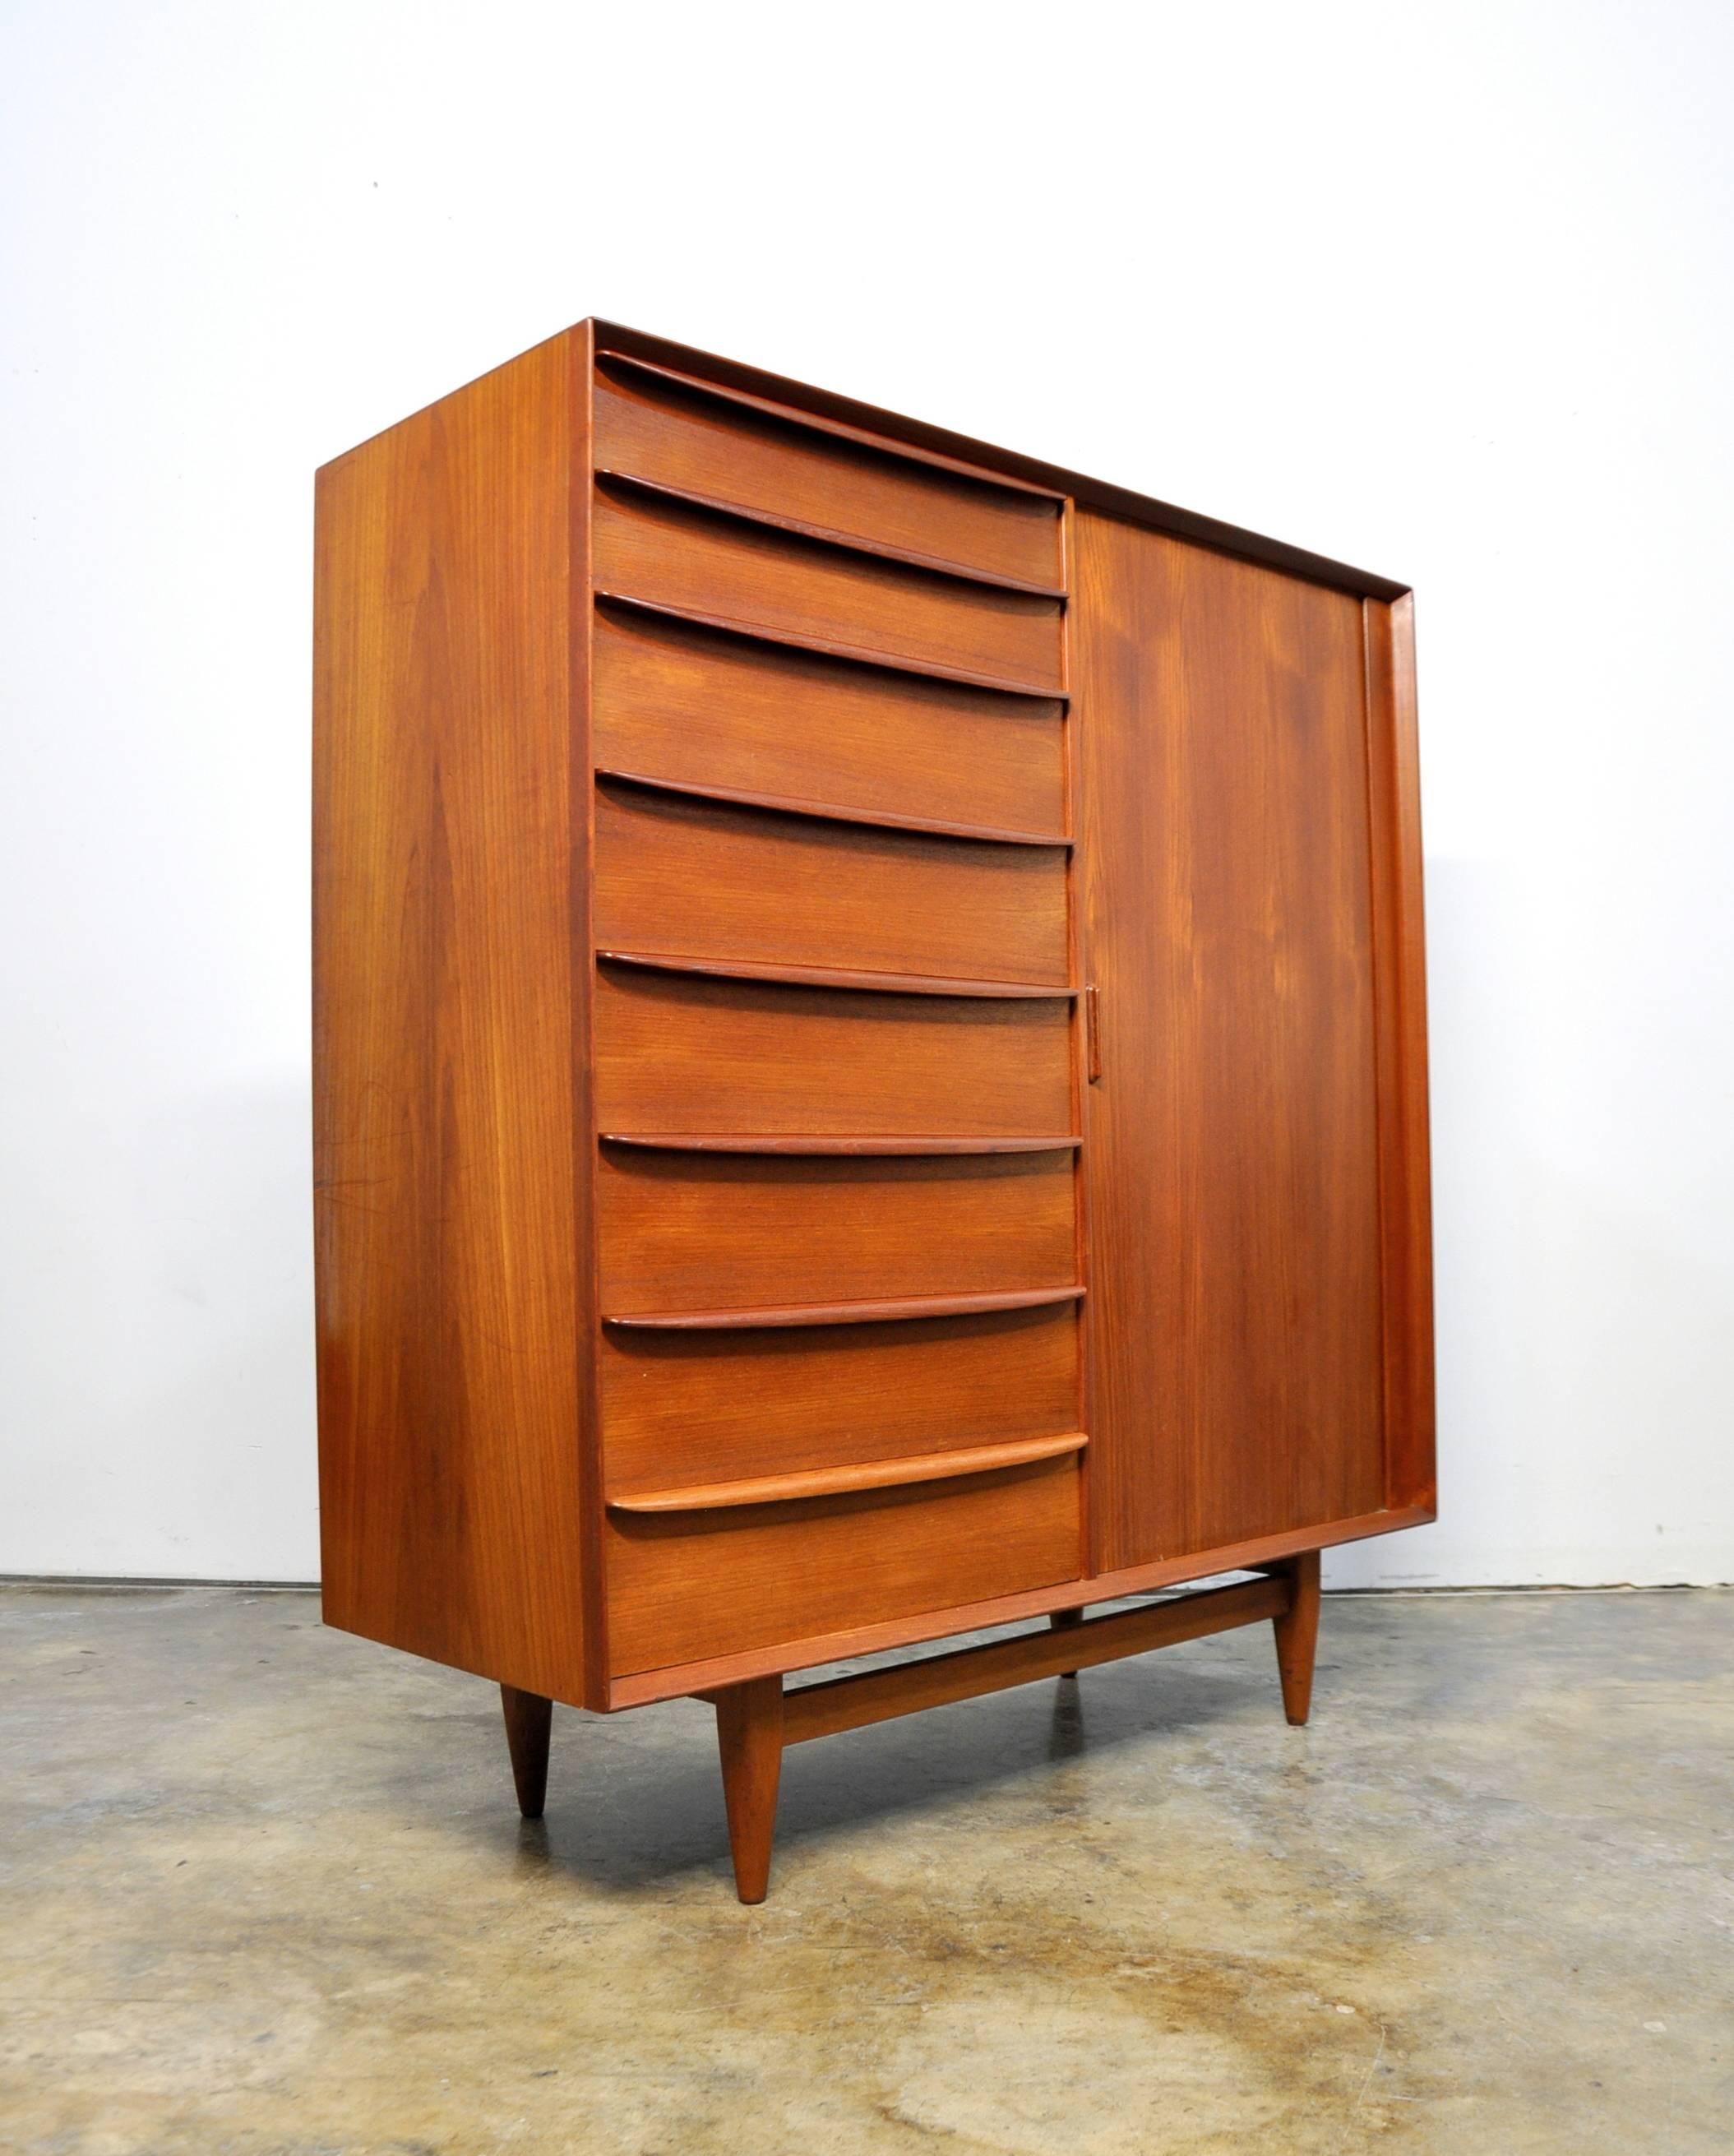 Both gorgeous and functional, this Mid-Century Danish modern bachelor's chest of drawers dates from the 1960s. With a total of 17 drawers, it provides a ton of storage space. The vintage wardrobe features sculpted teak handles, tambour door and